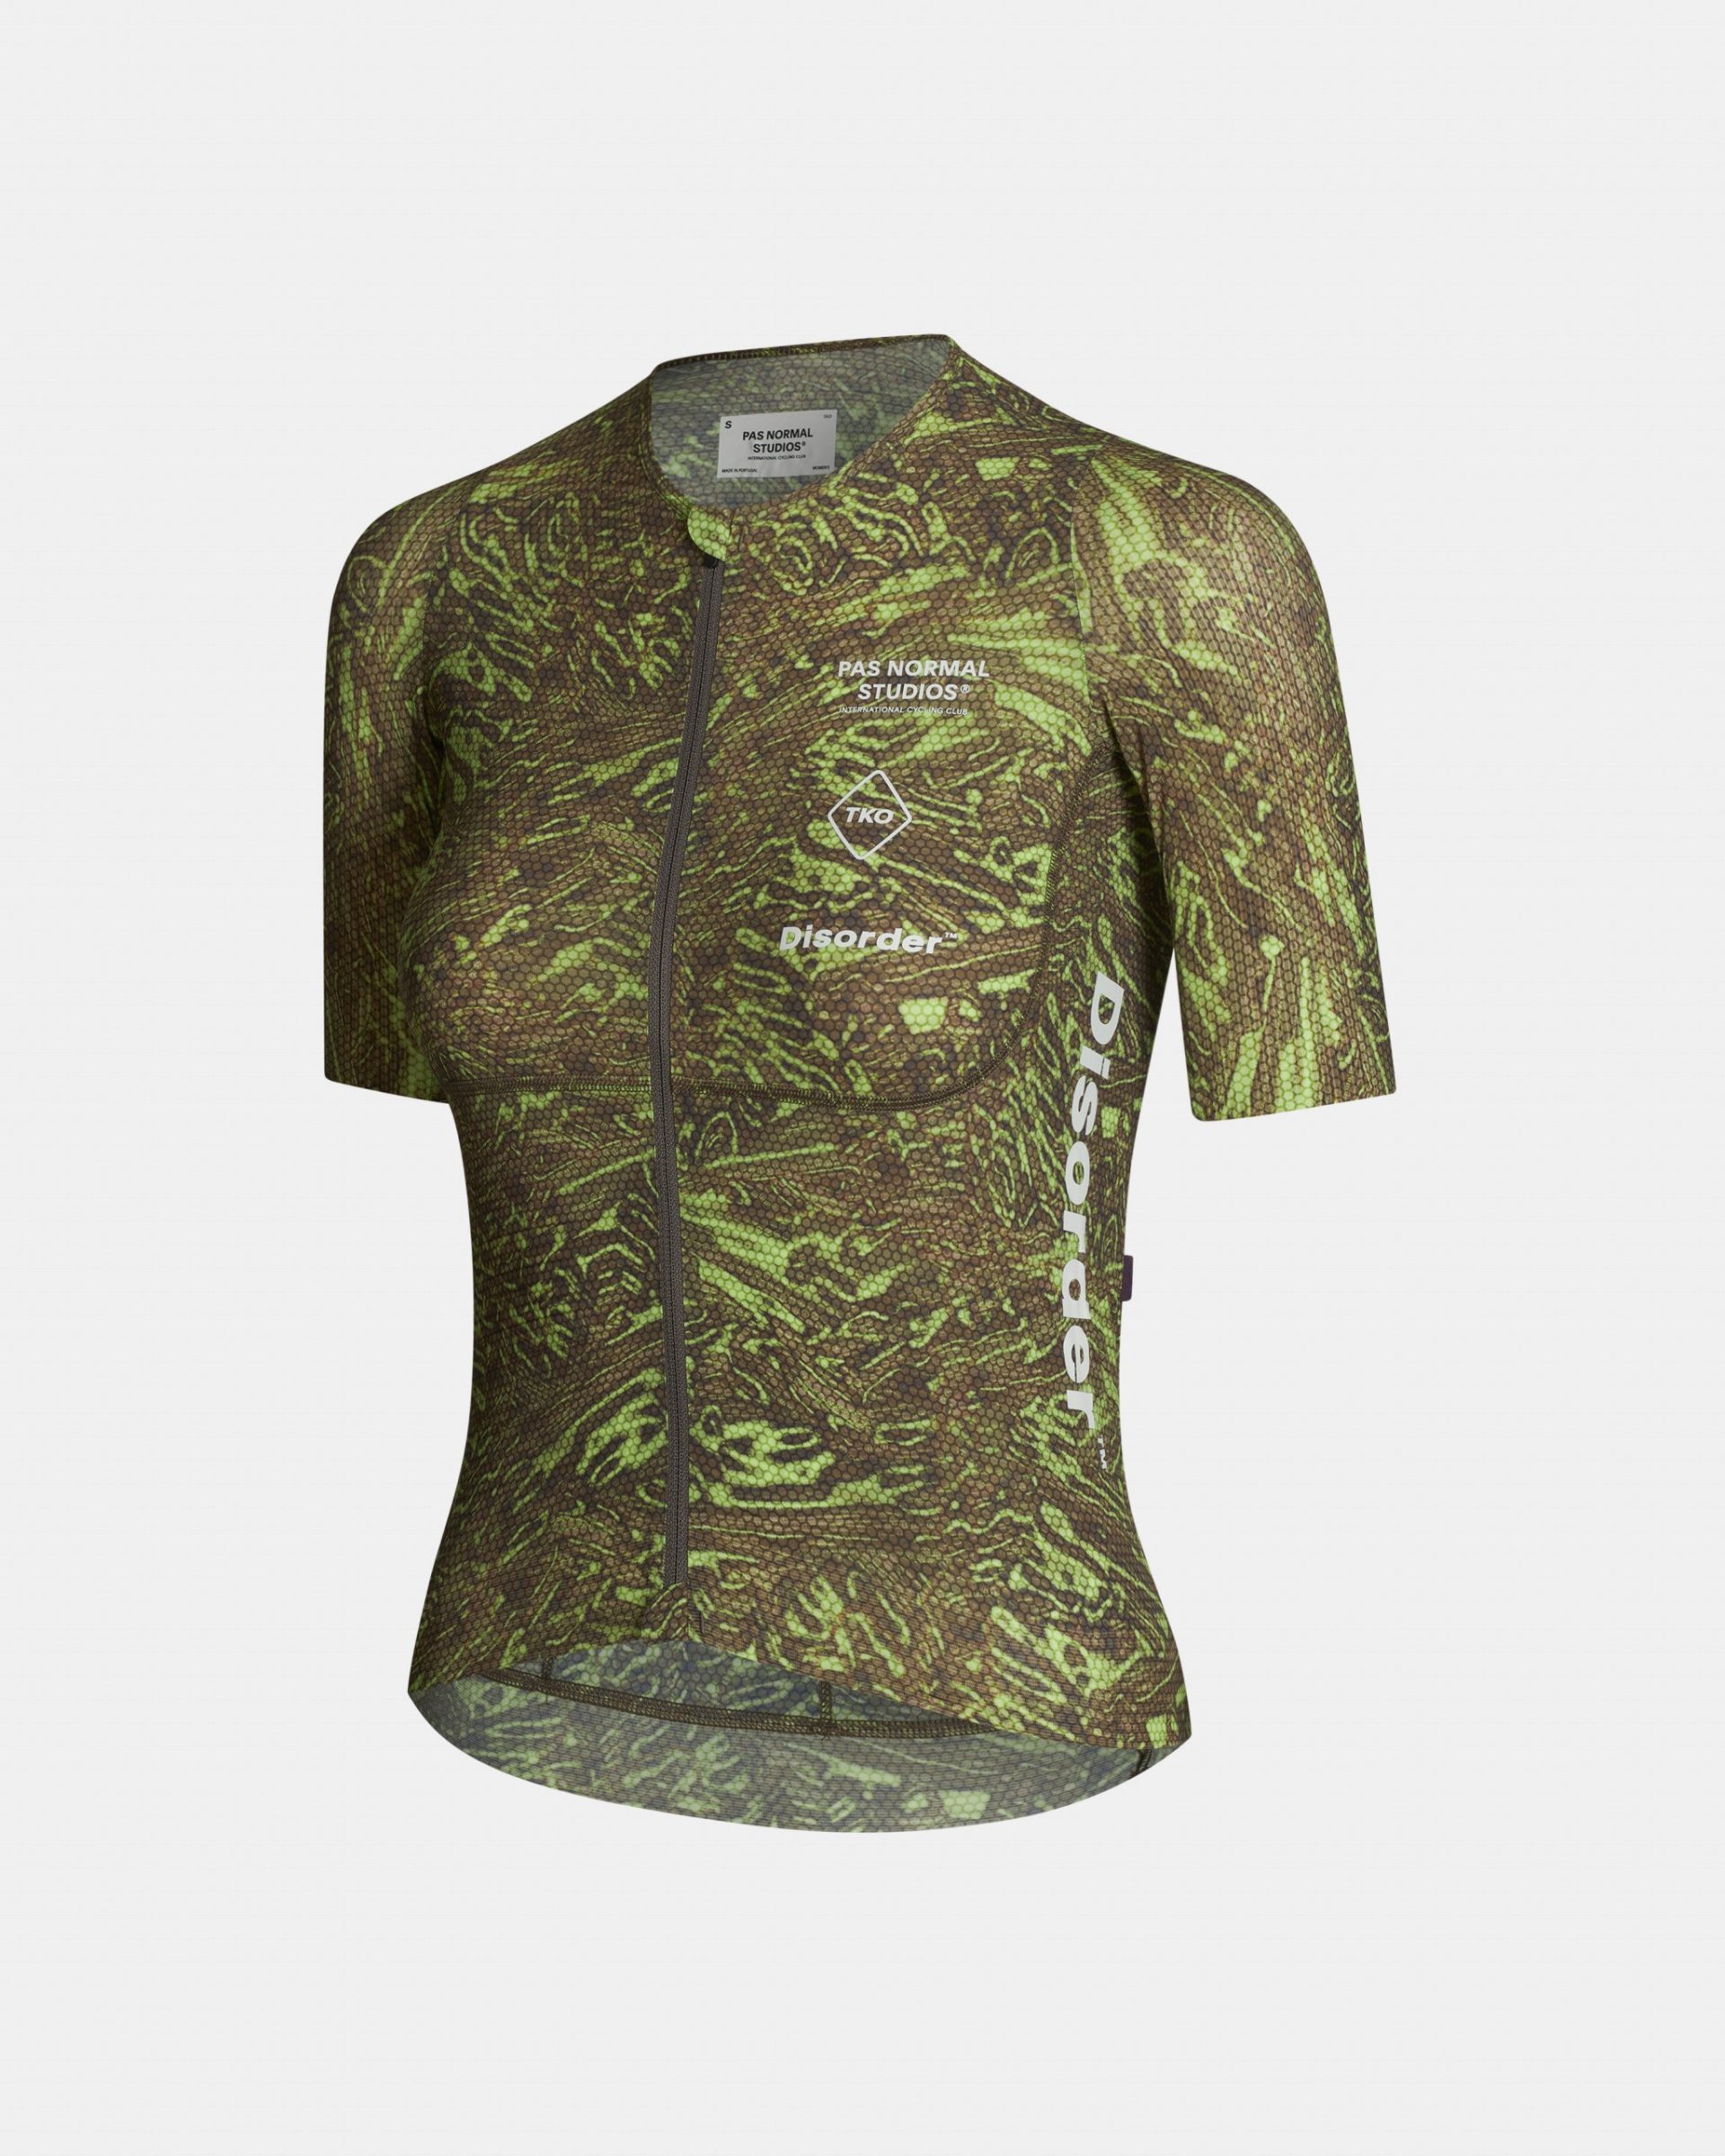 Womens-TKO-Short-Sleeve-Jersey_Green_Side-pdp-page